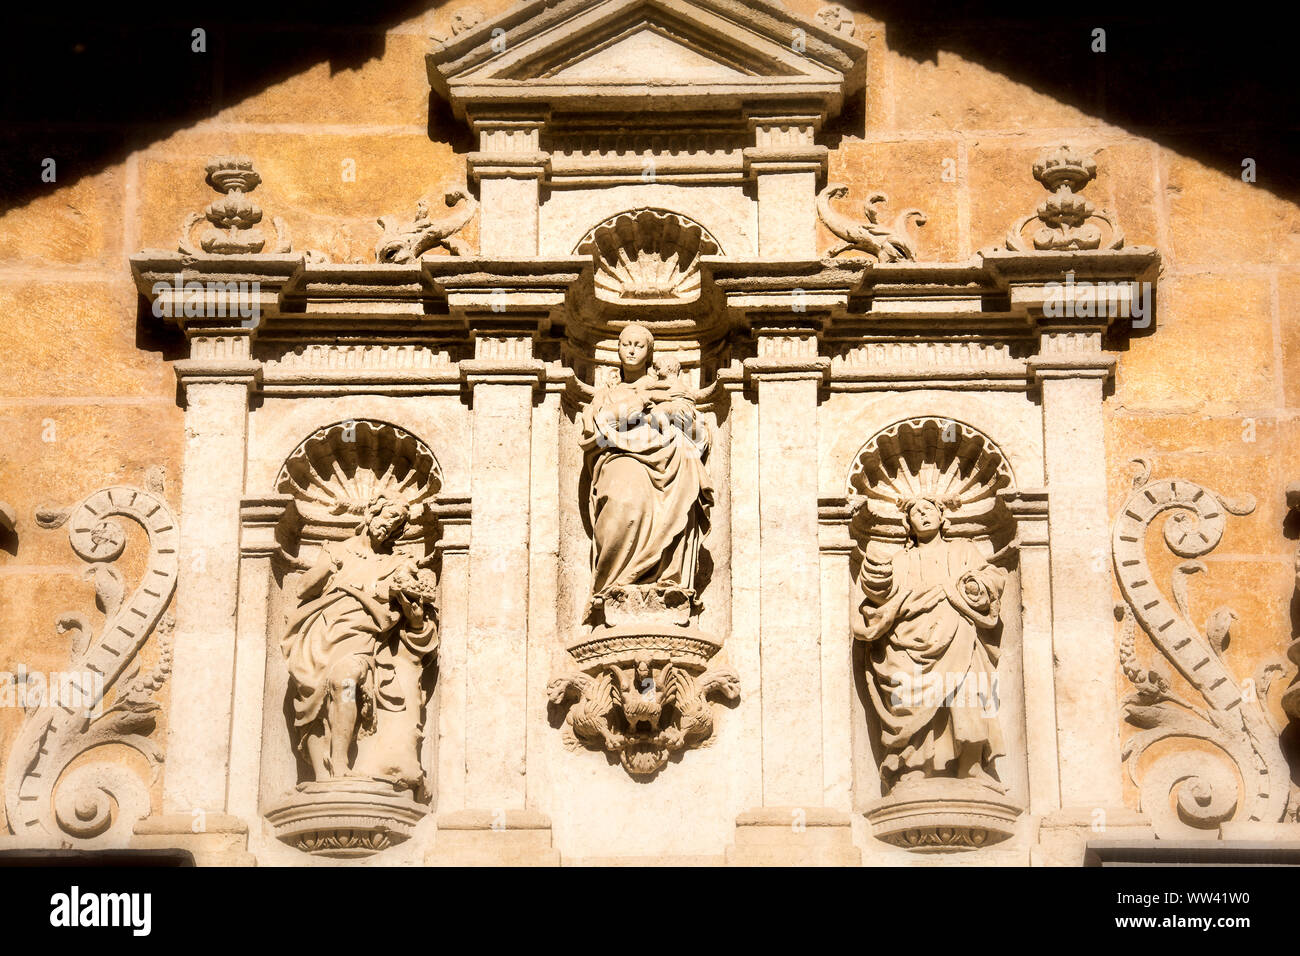 Exterior wall of the Granada Cathedral in Granada, Spain featuring ornate, religious-oriented symbols and figures. Stock Photo